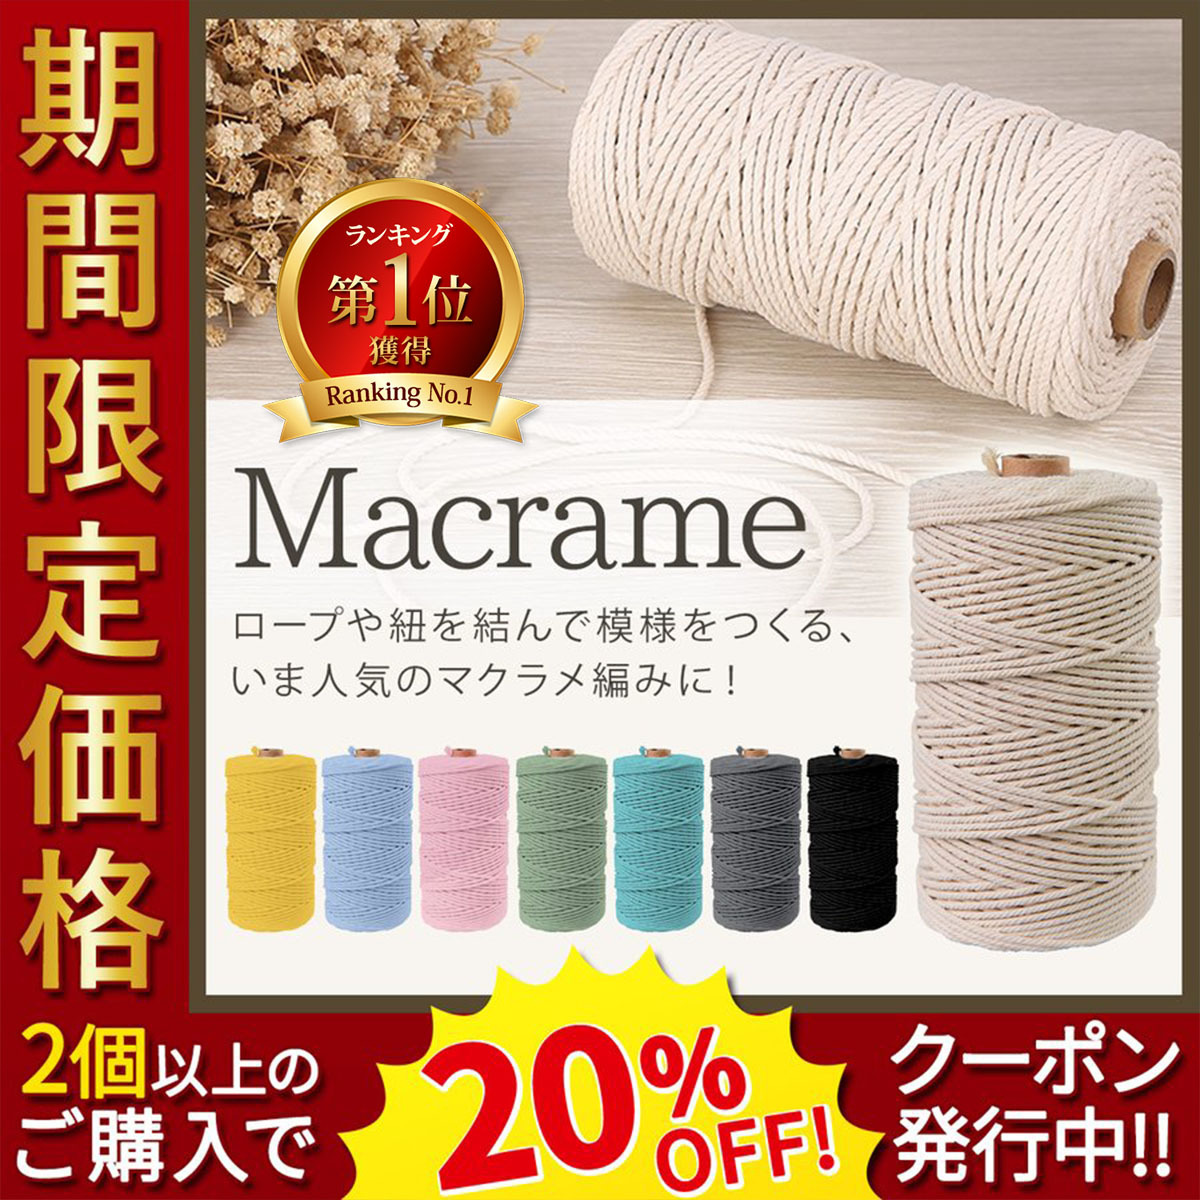 mak lame 3mm 200m code cord thread hand made handicrafts handmade hand-knitted cotton small articles accessory 